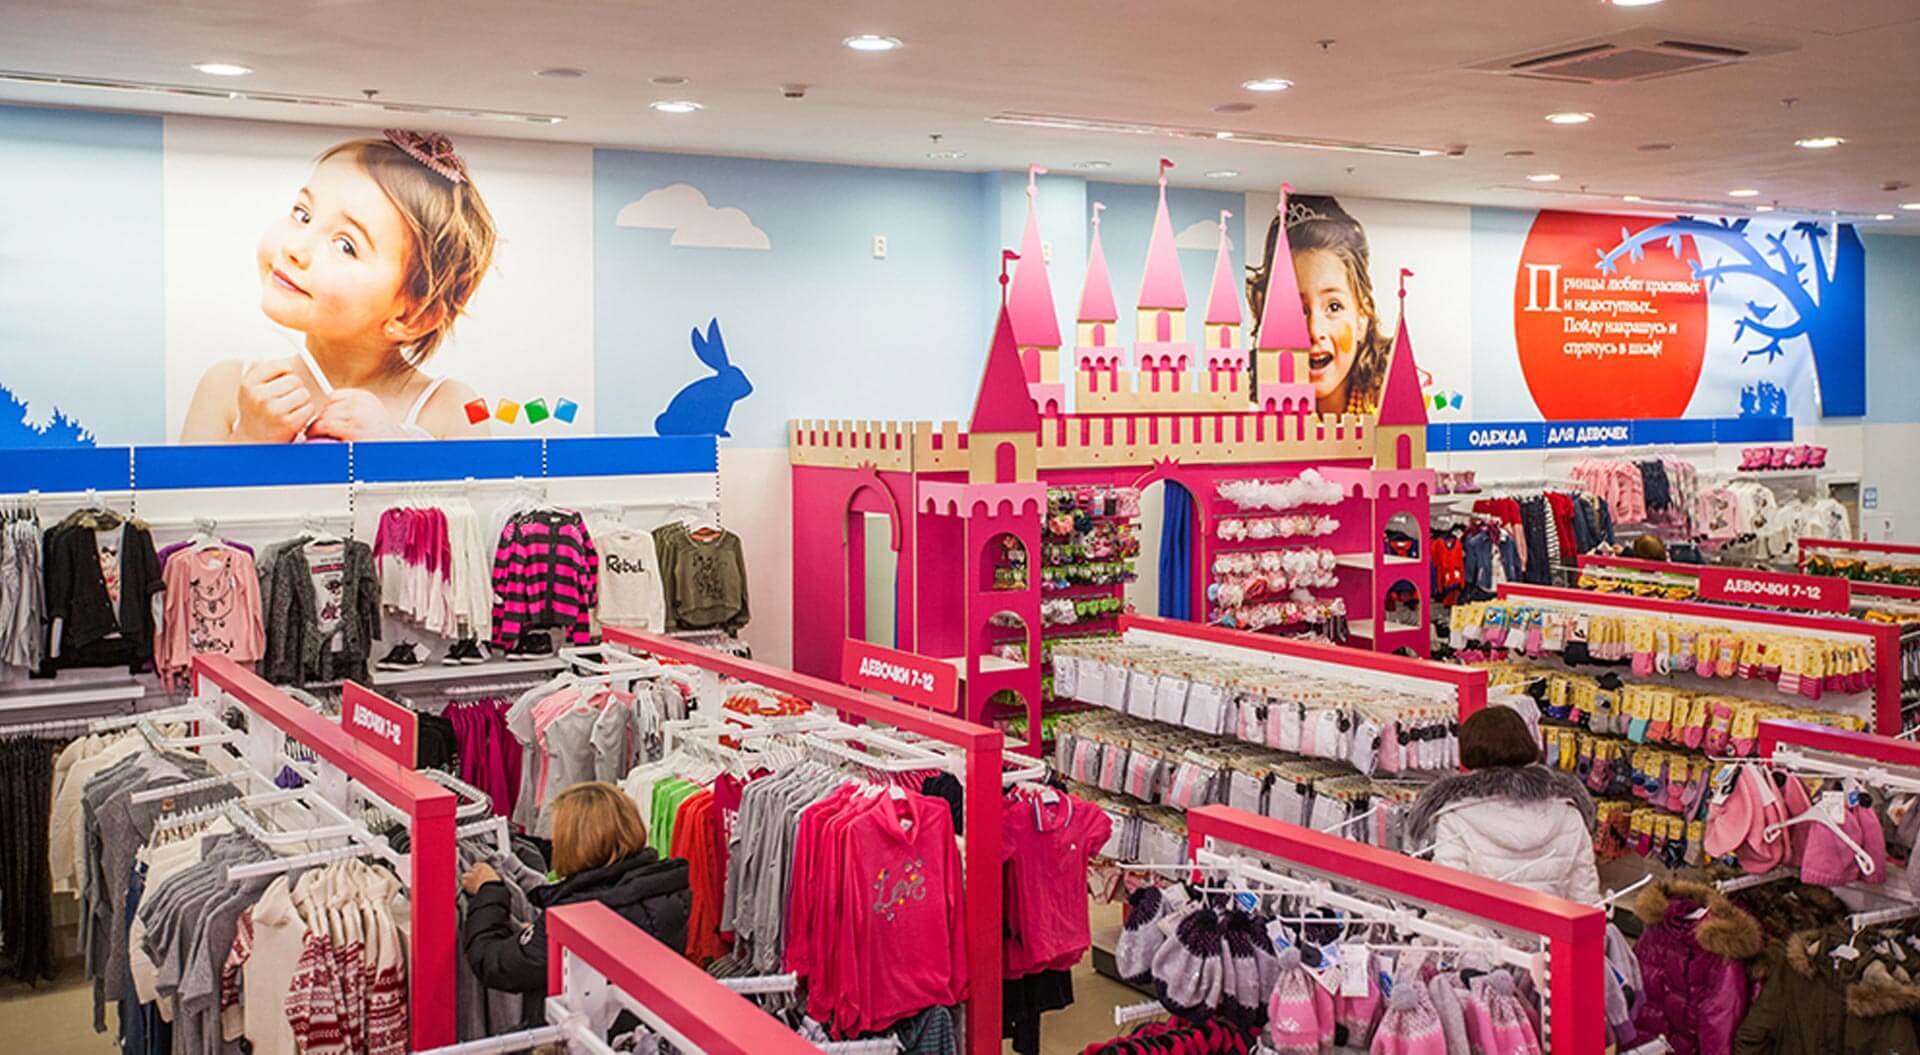 Detskiy Mir Russia best internal department branding, store interior design, concepts for toys and children's fashion changing room design